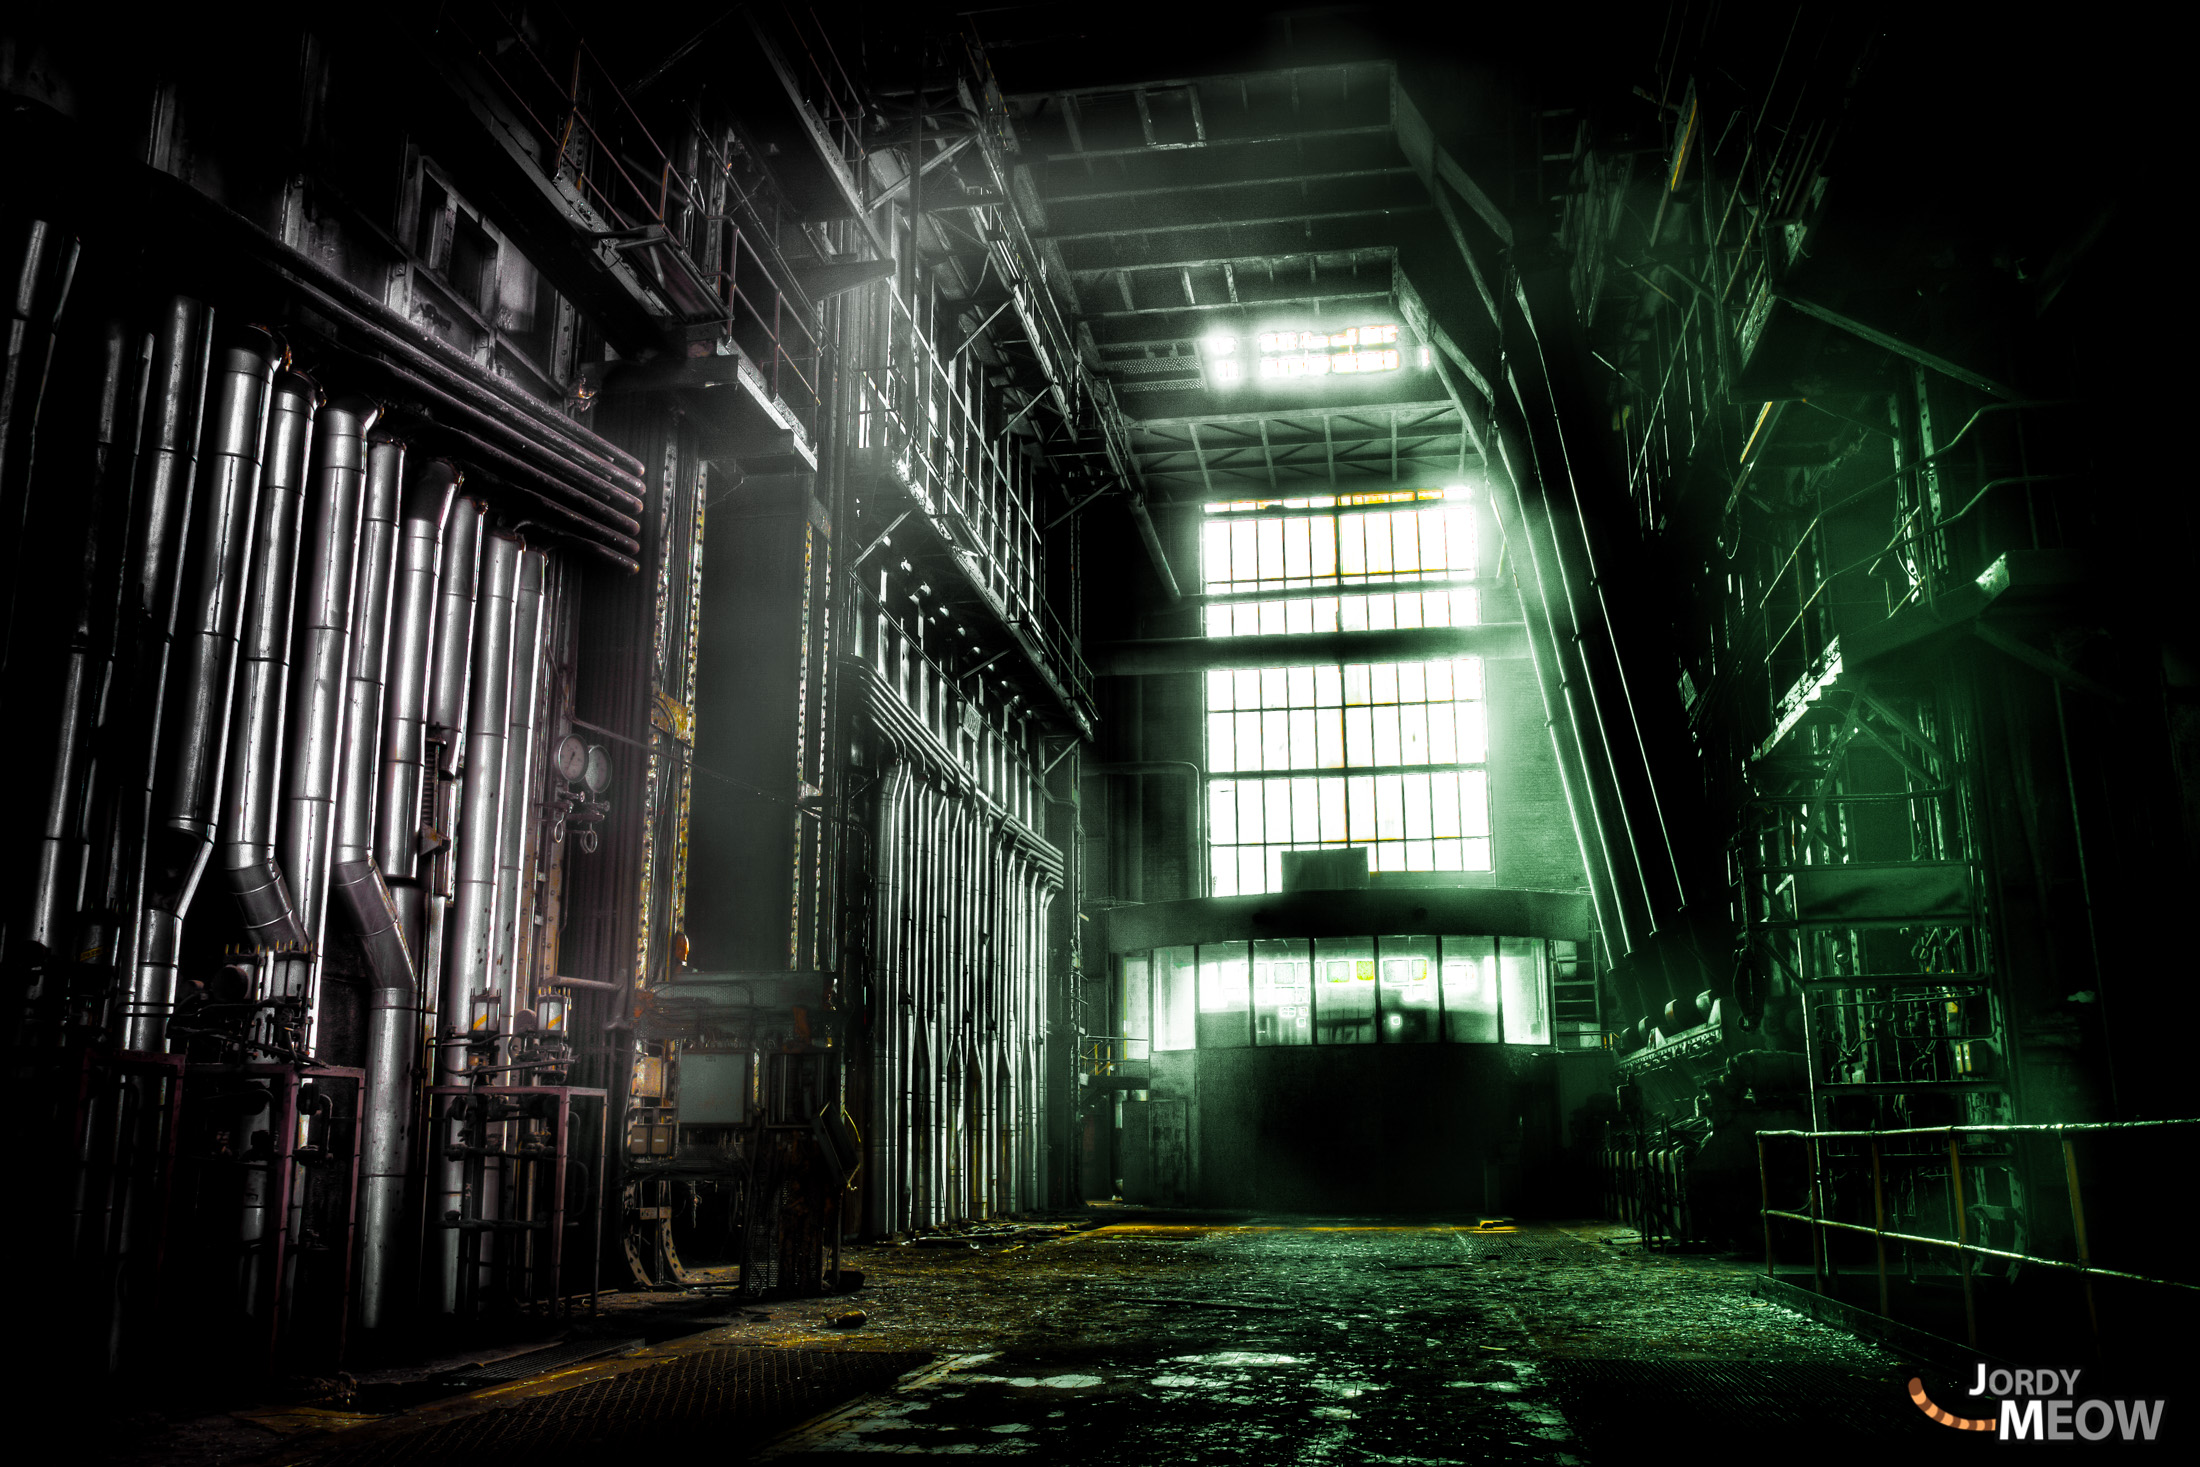 Eerie industrial decay at abandoned ECVB Powerplant in Belgium.